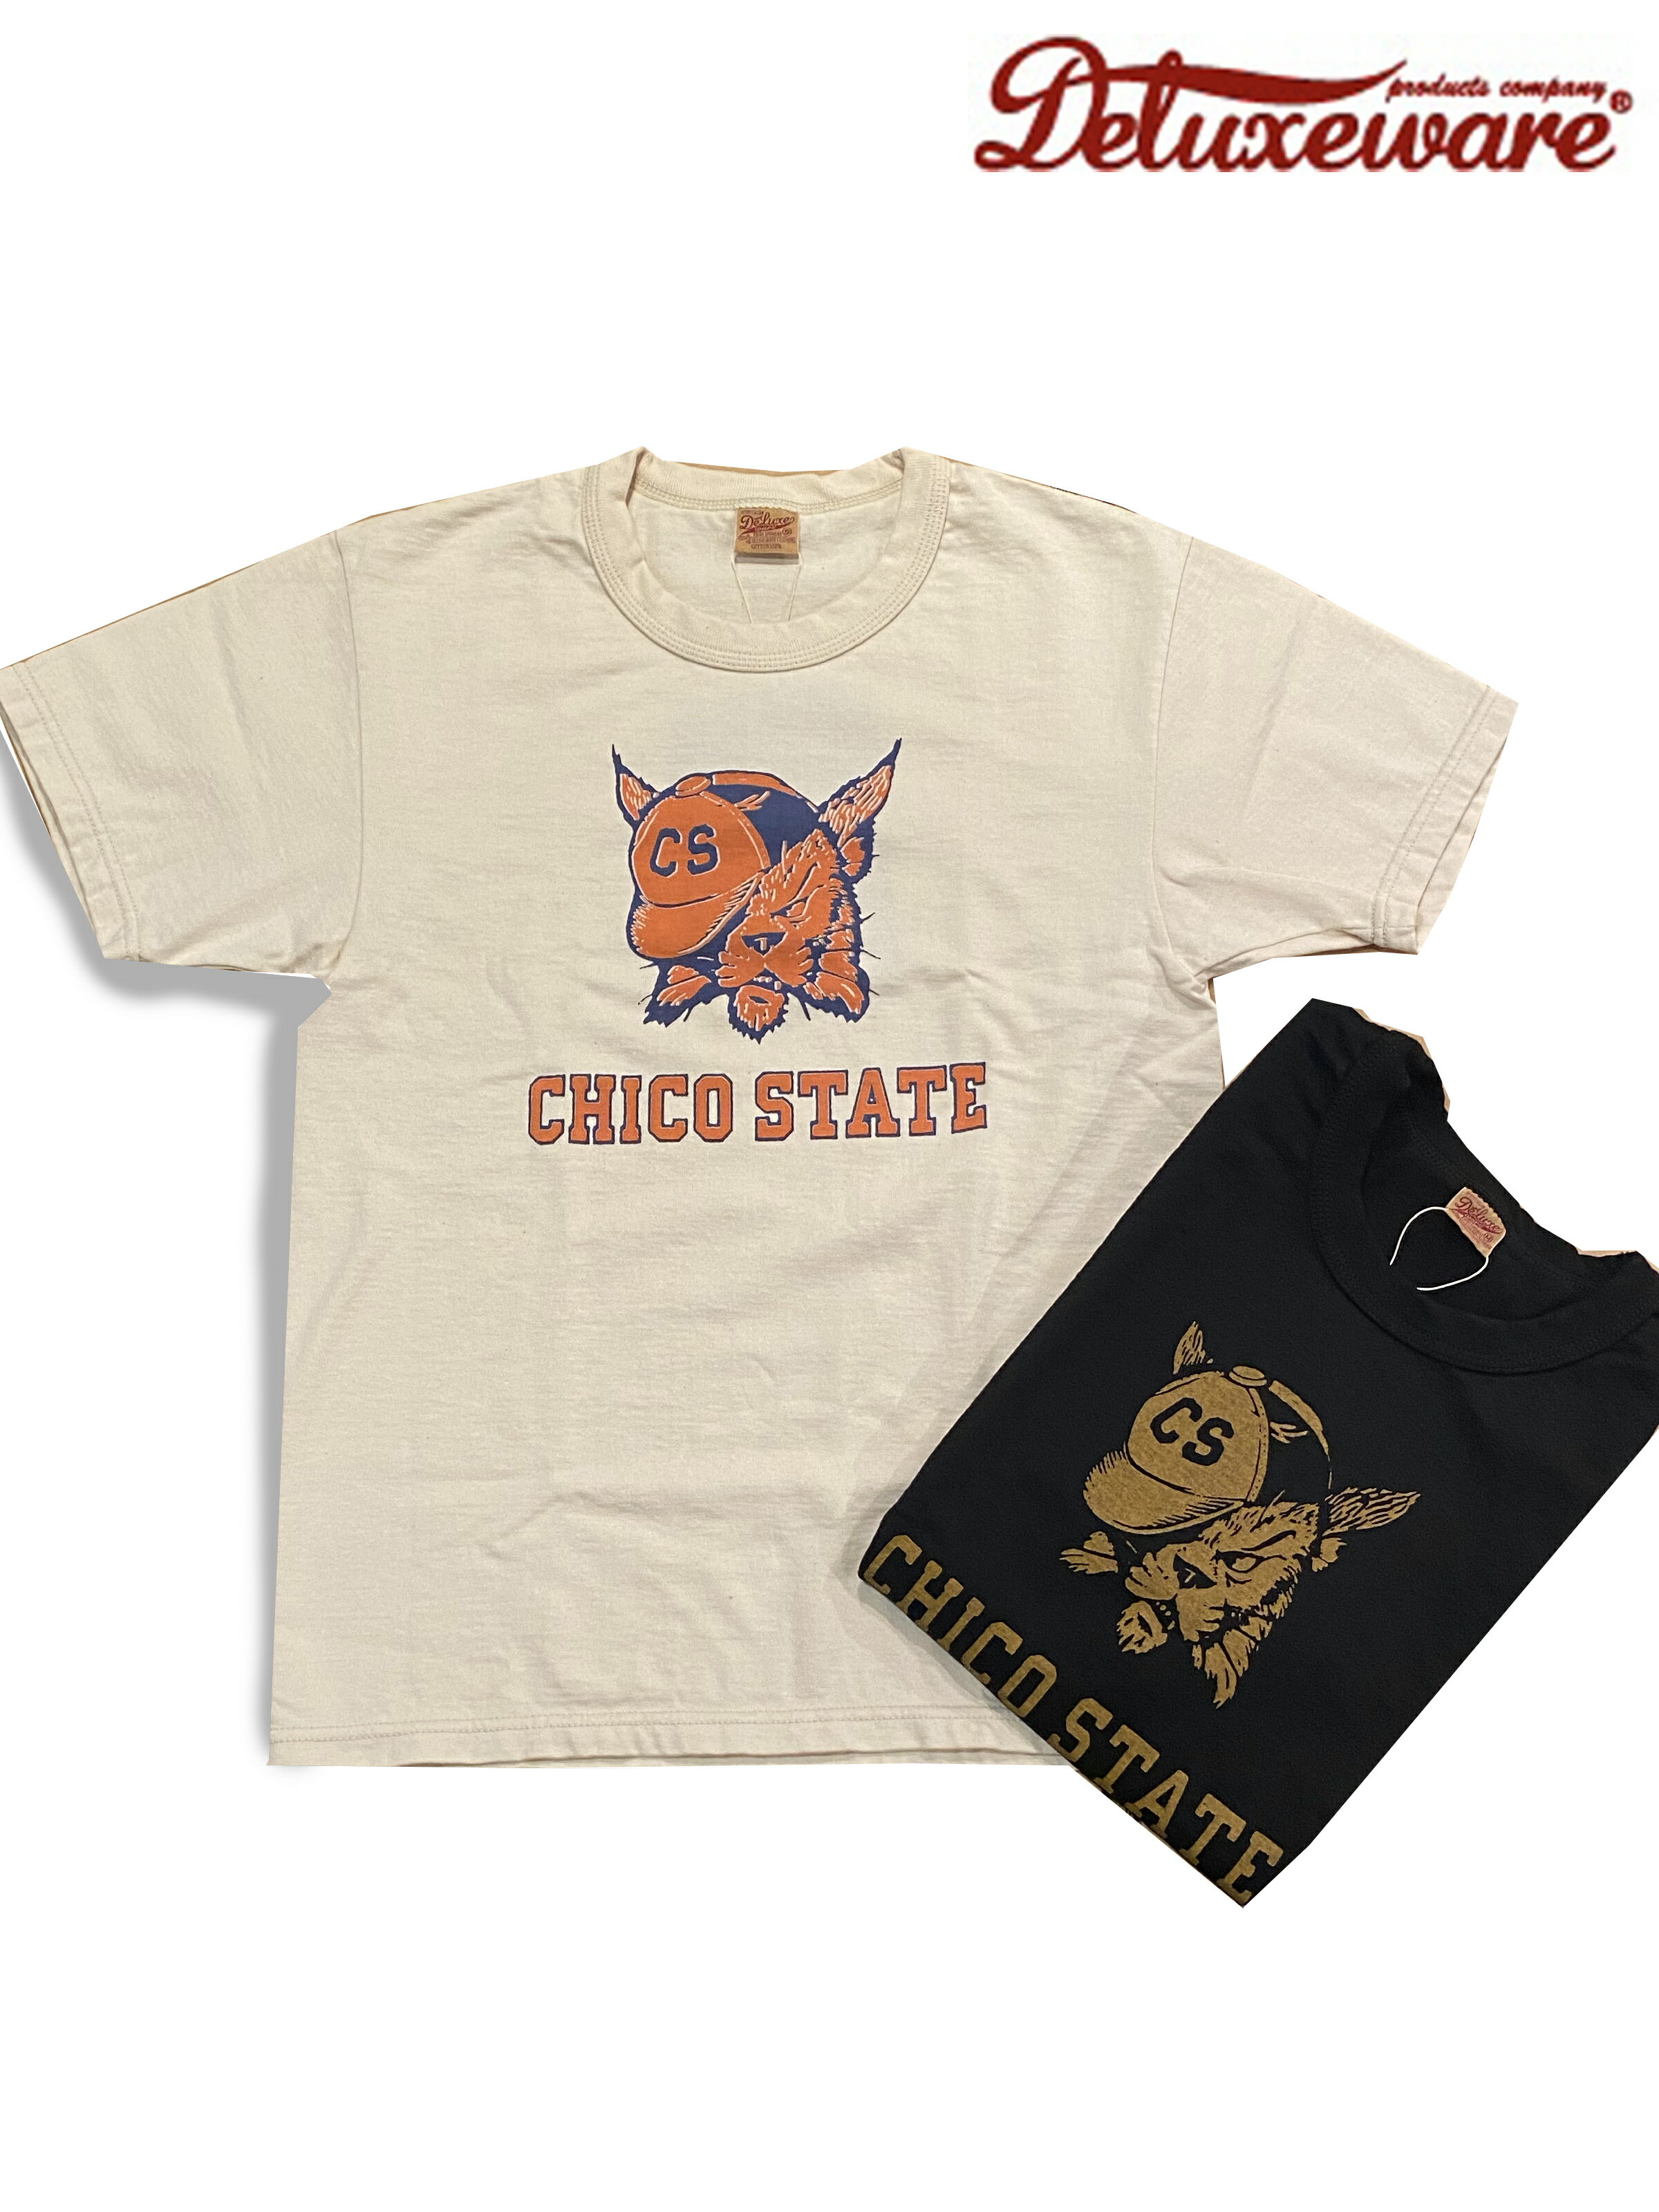 DELUXE WARE（デラックスウェア) CHICO STATE 半袖Tシャツ SDL-2101/ 2-COLORS: /　Made.In.Japan 